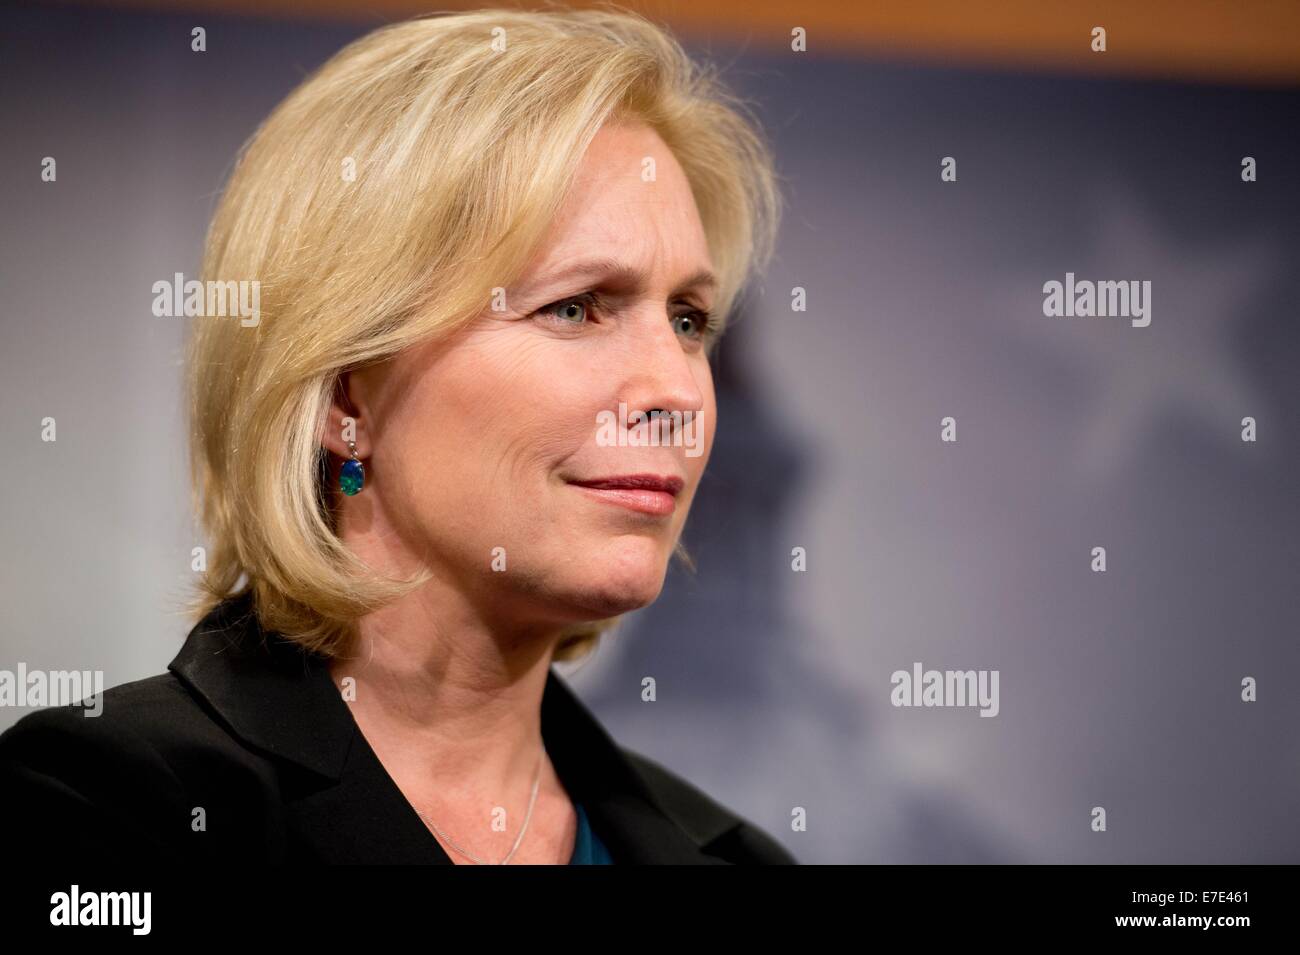 Kirsten gillibrand 2014 hi-res stock photography and images - Alamy